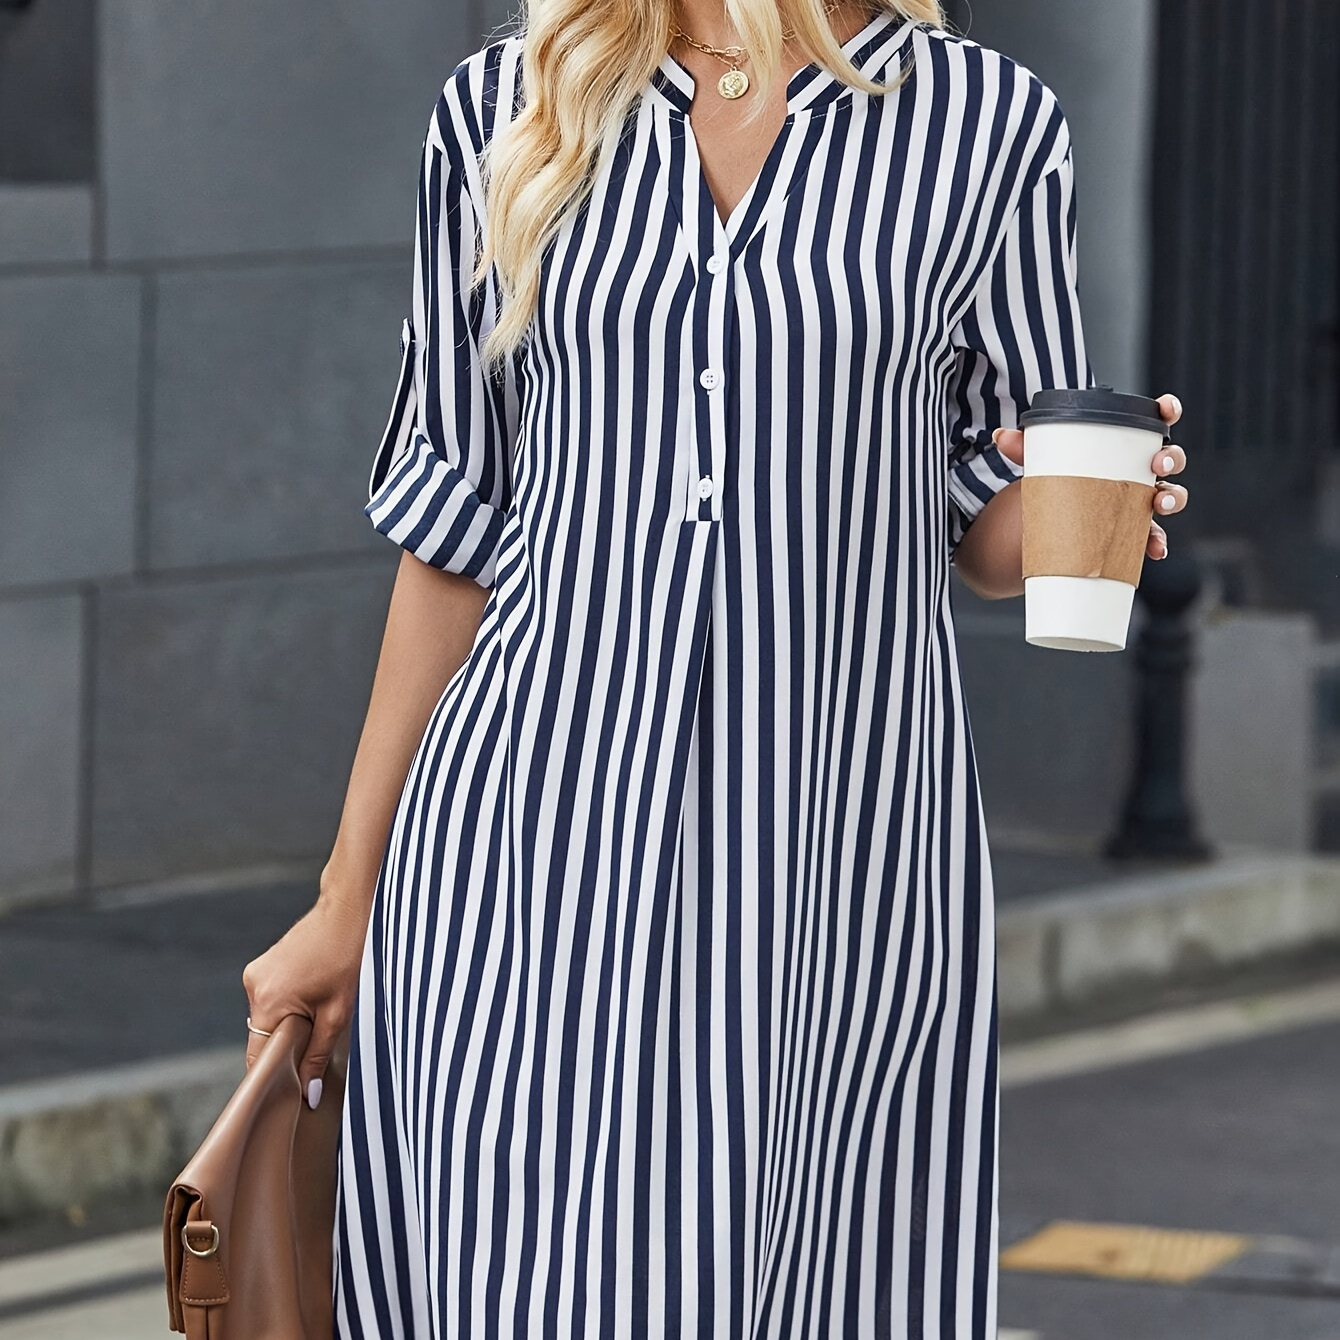 

Striped Print Notched Neck Dress, Casual Long Sleeve Dress For Spring & Summer, Women's Clothing For Elegant Dressing